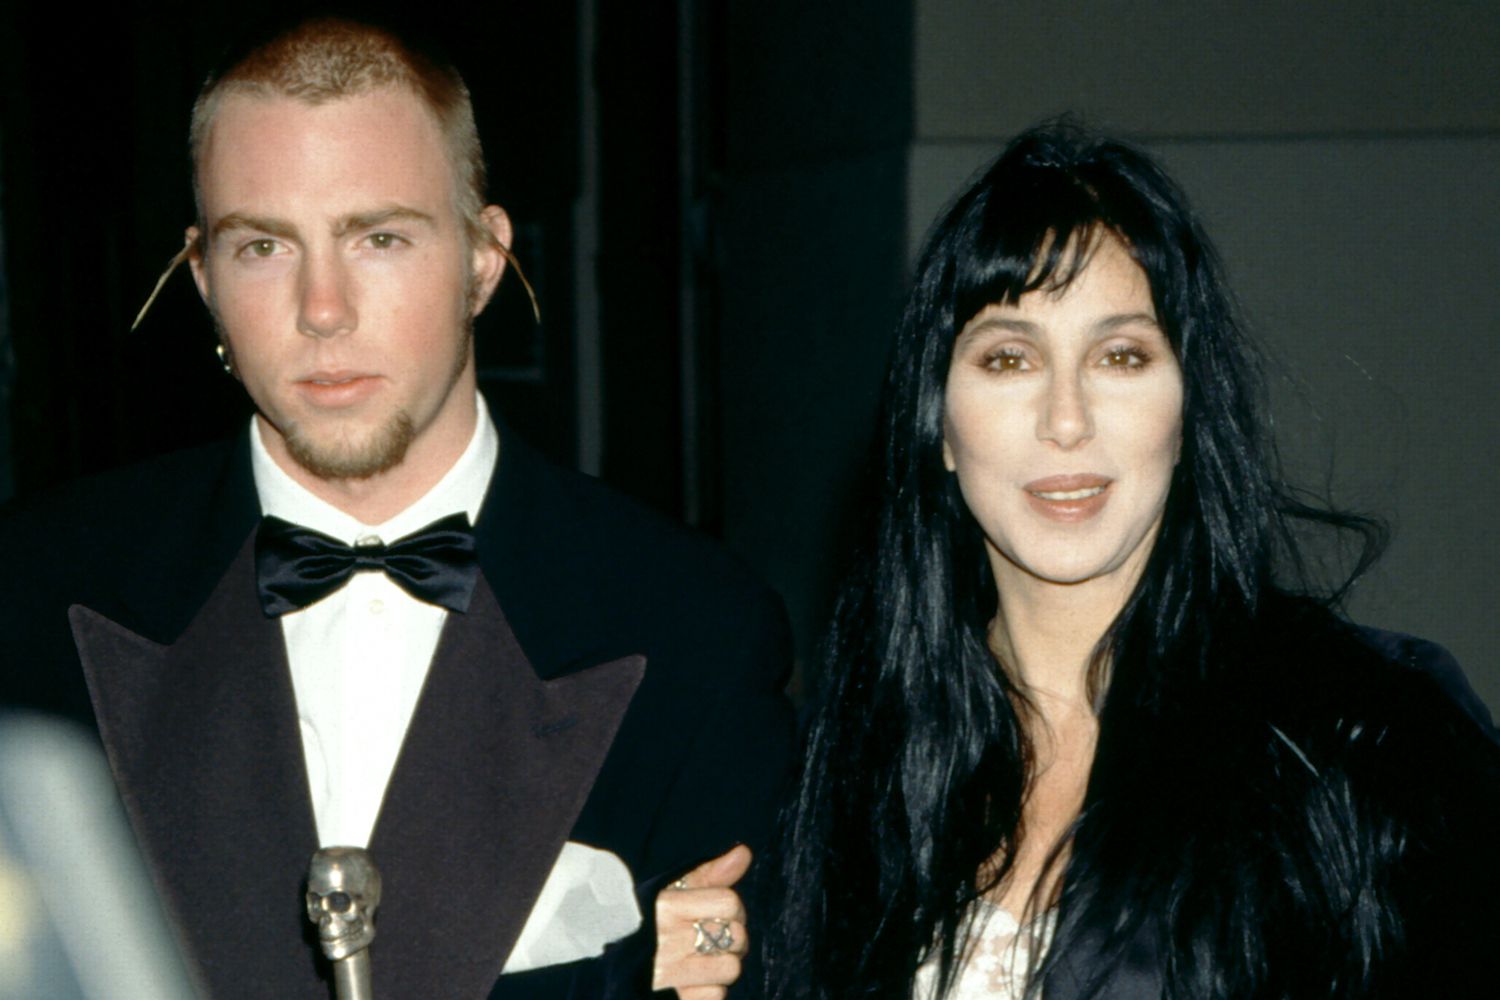 Cher Speaks Out About Allegations of Kidnapping Made by Her Son's Estranged Wife